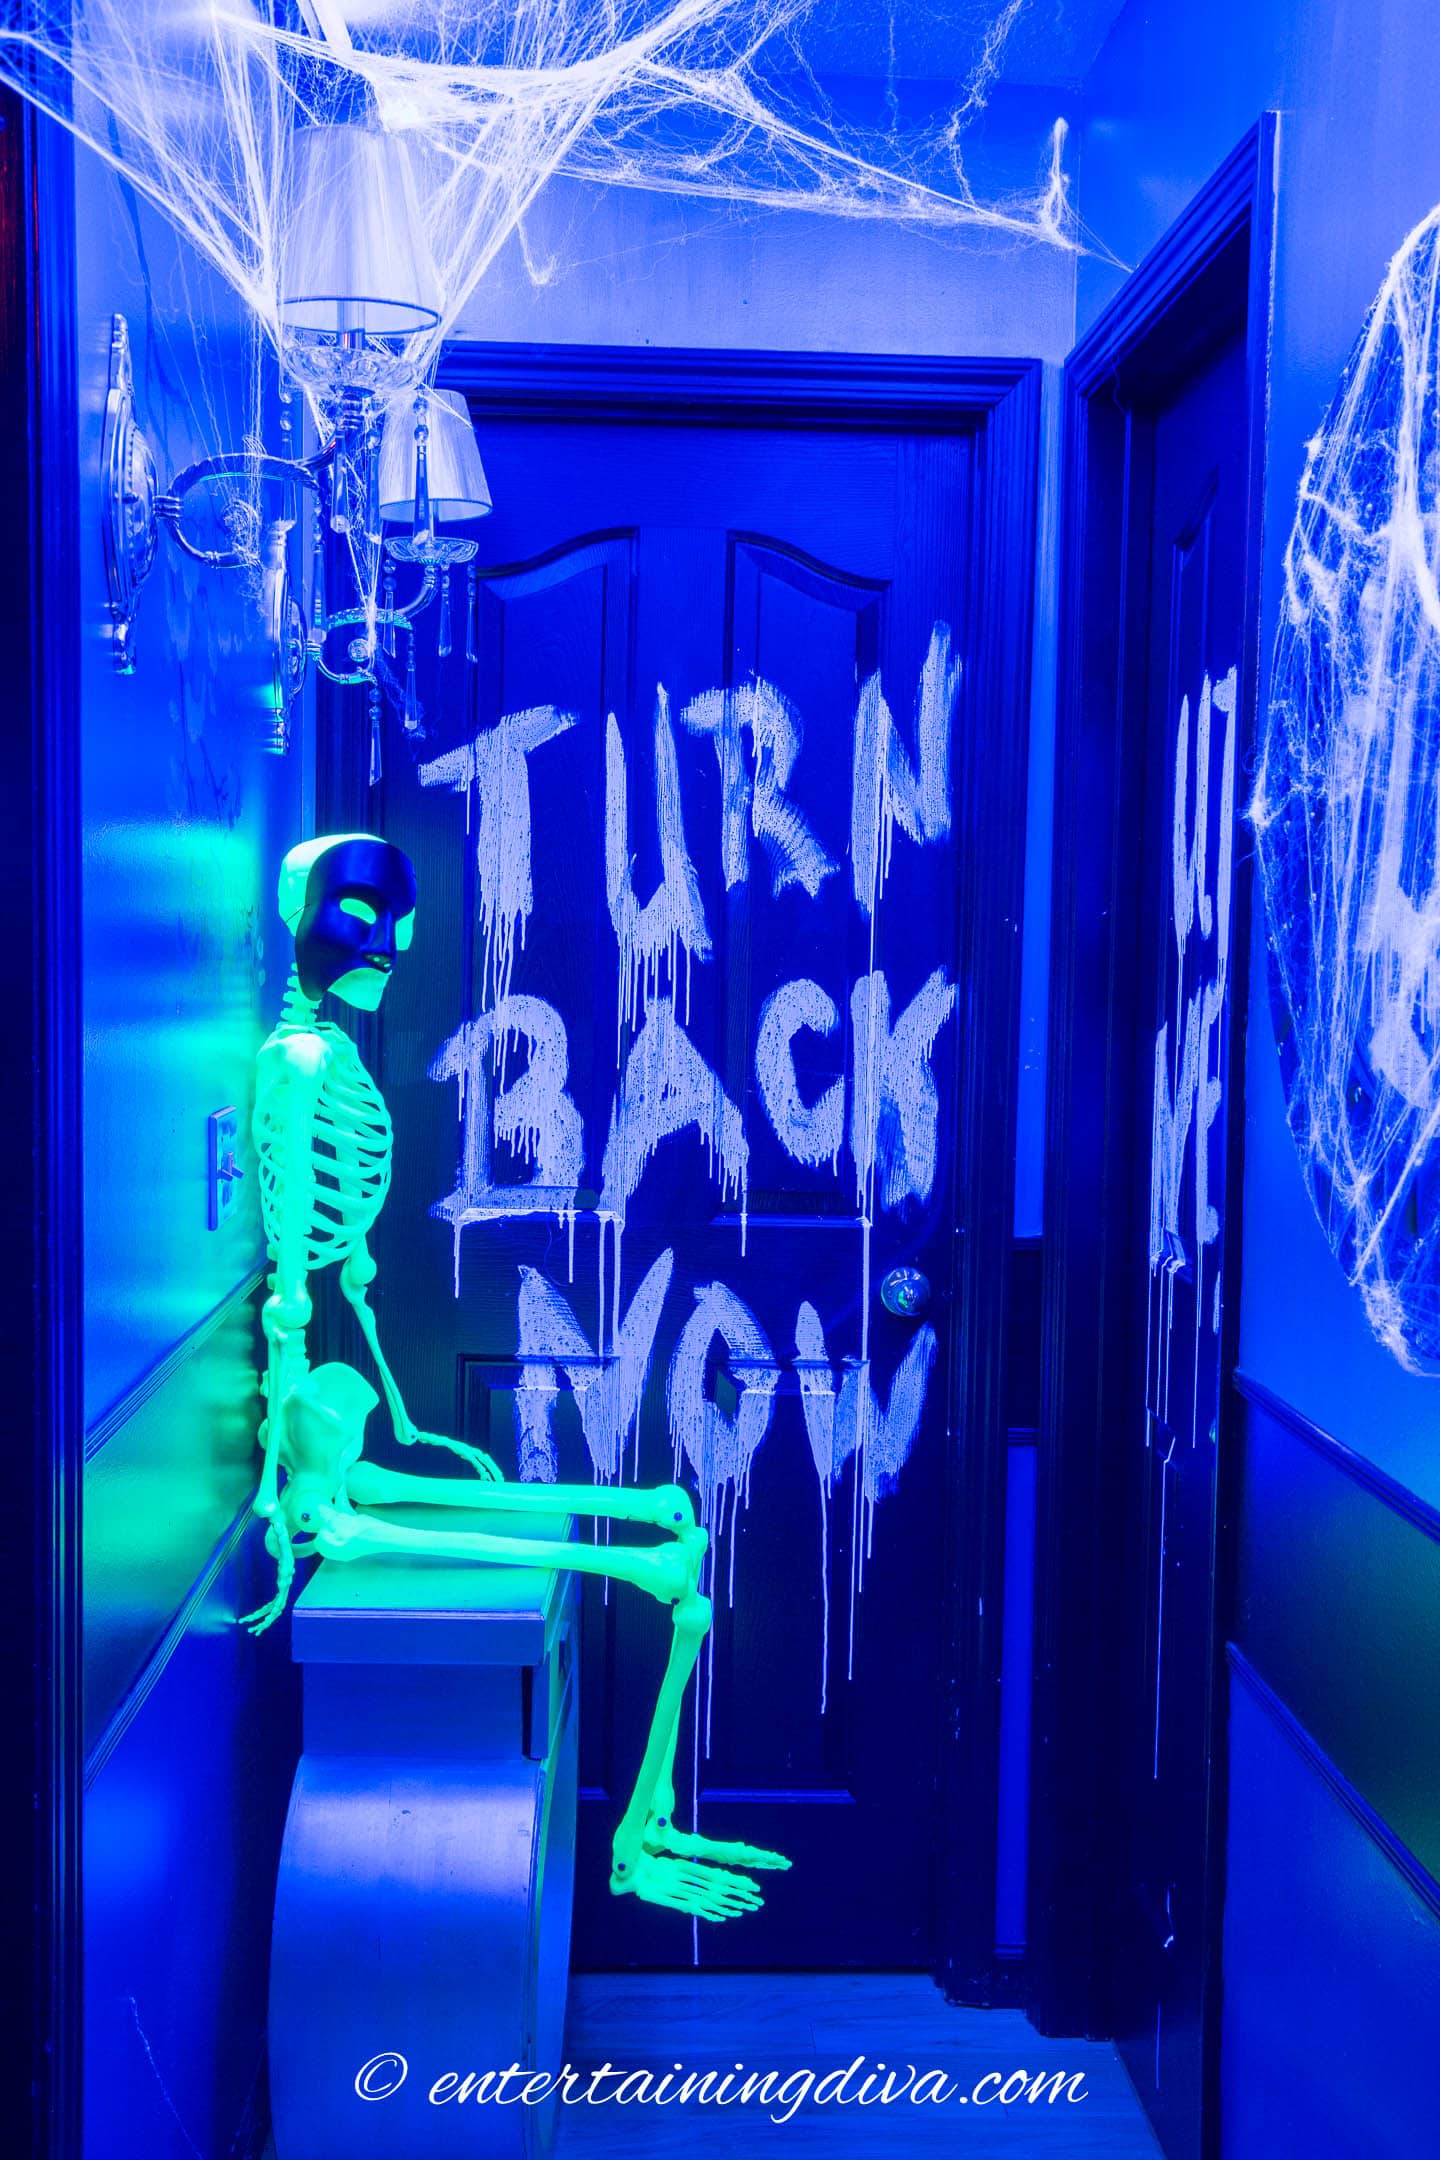 Glow in the dark messages written with laundry detergent